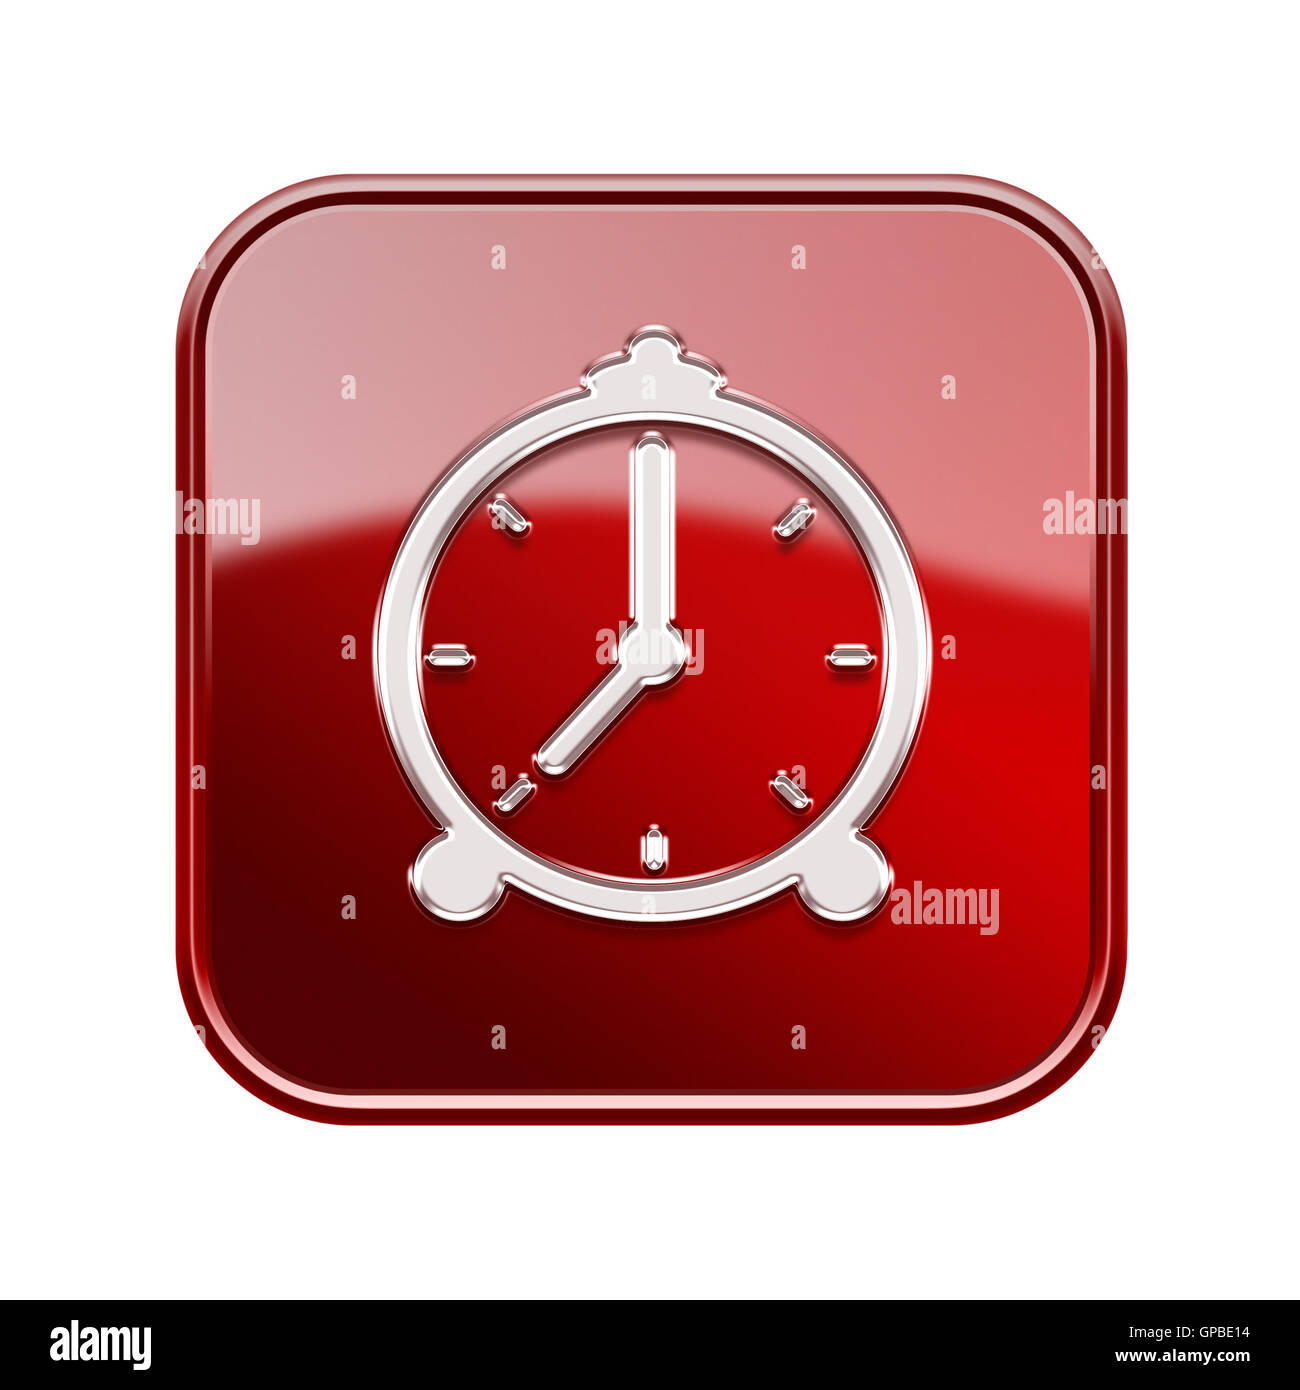 alarm clock icon glossy red, isolated on white background Stock Photo